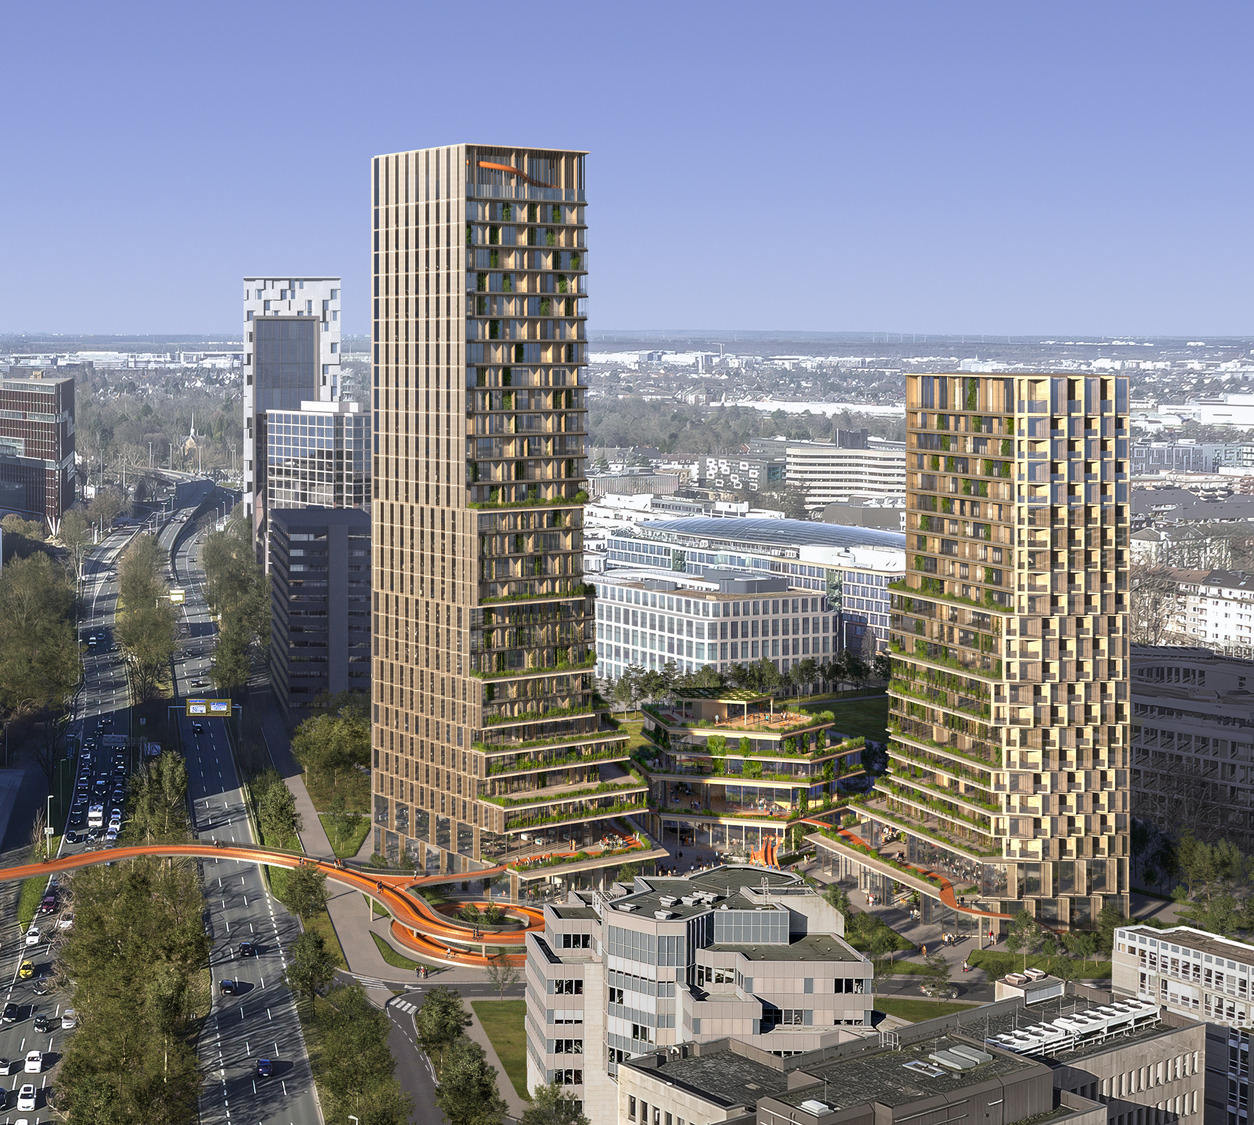 UNStudio’s proposal wins the competition for a new mixed-use development in Düsseldorf